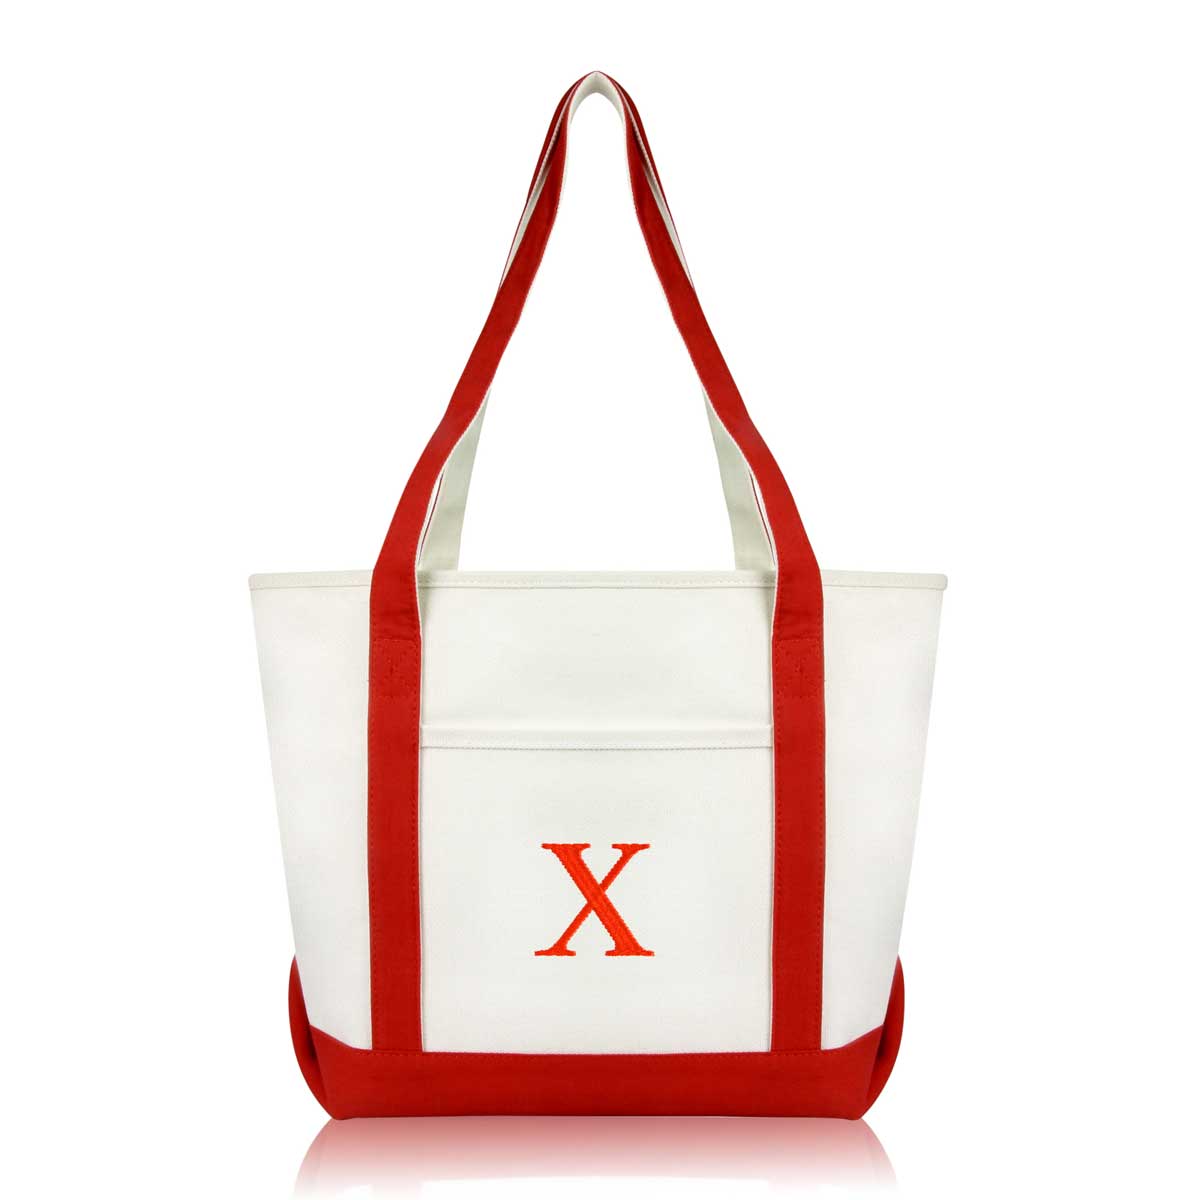 Dalix Medium Personalized Tote Bag Monogrammed Initial Letter - X